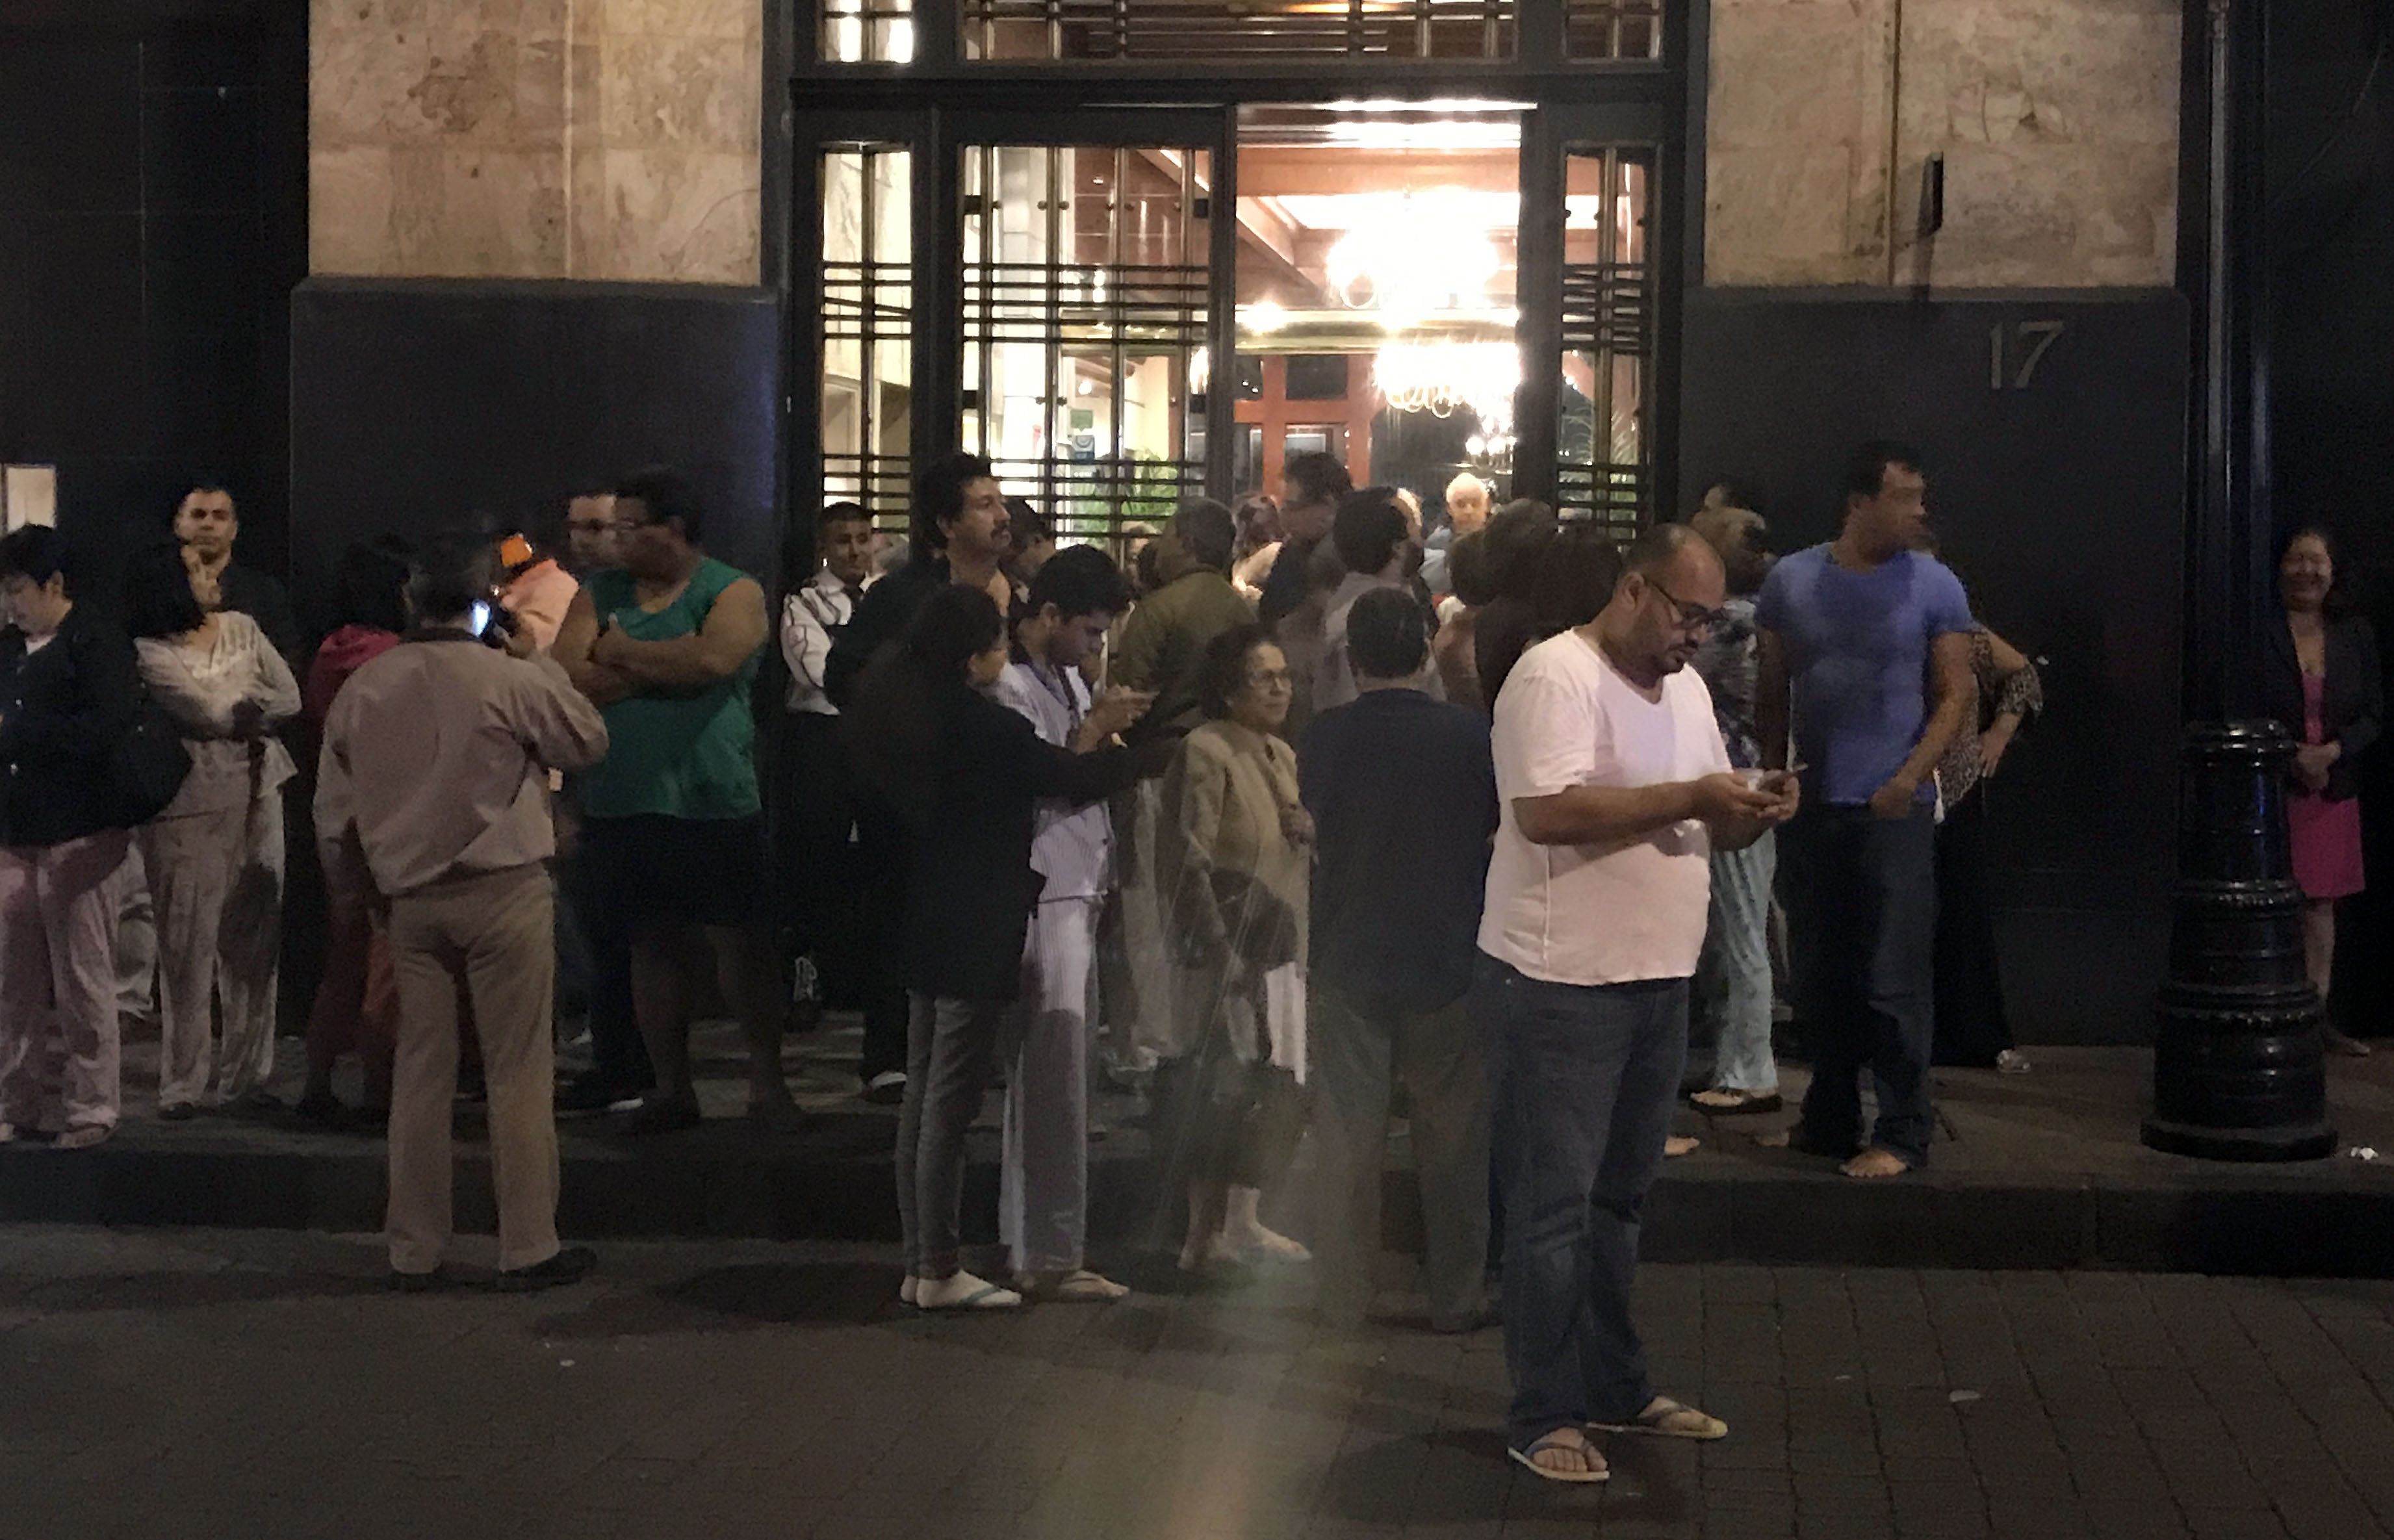 Residents of Mexico City wait outside as buildings sway from earthquake